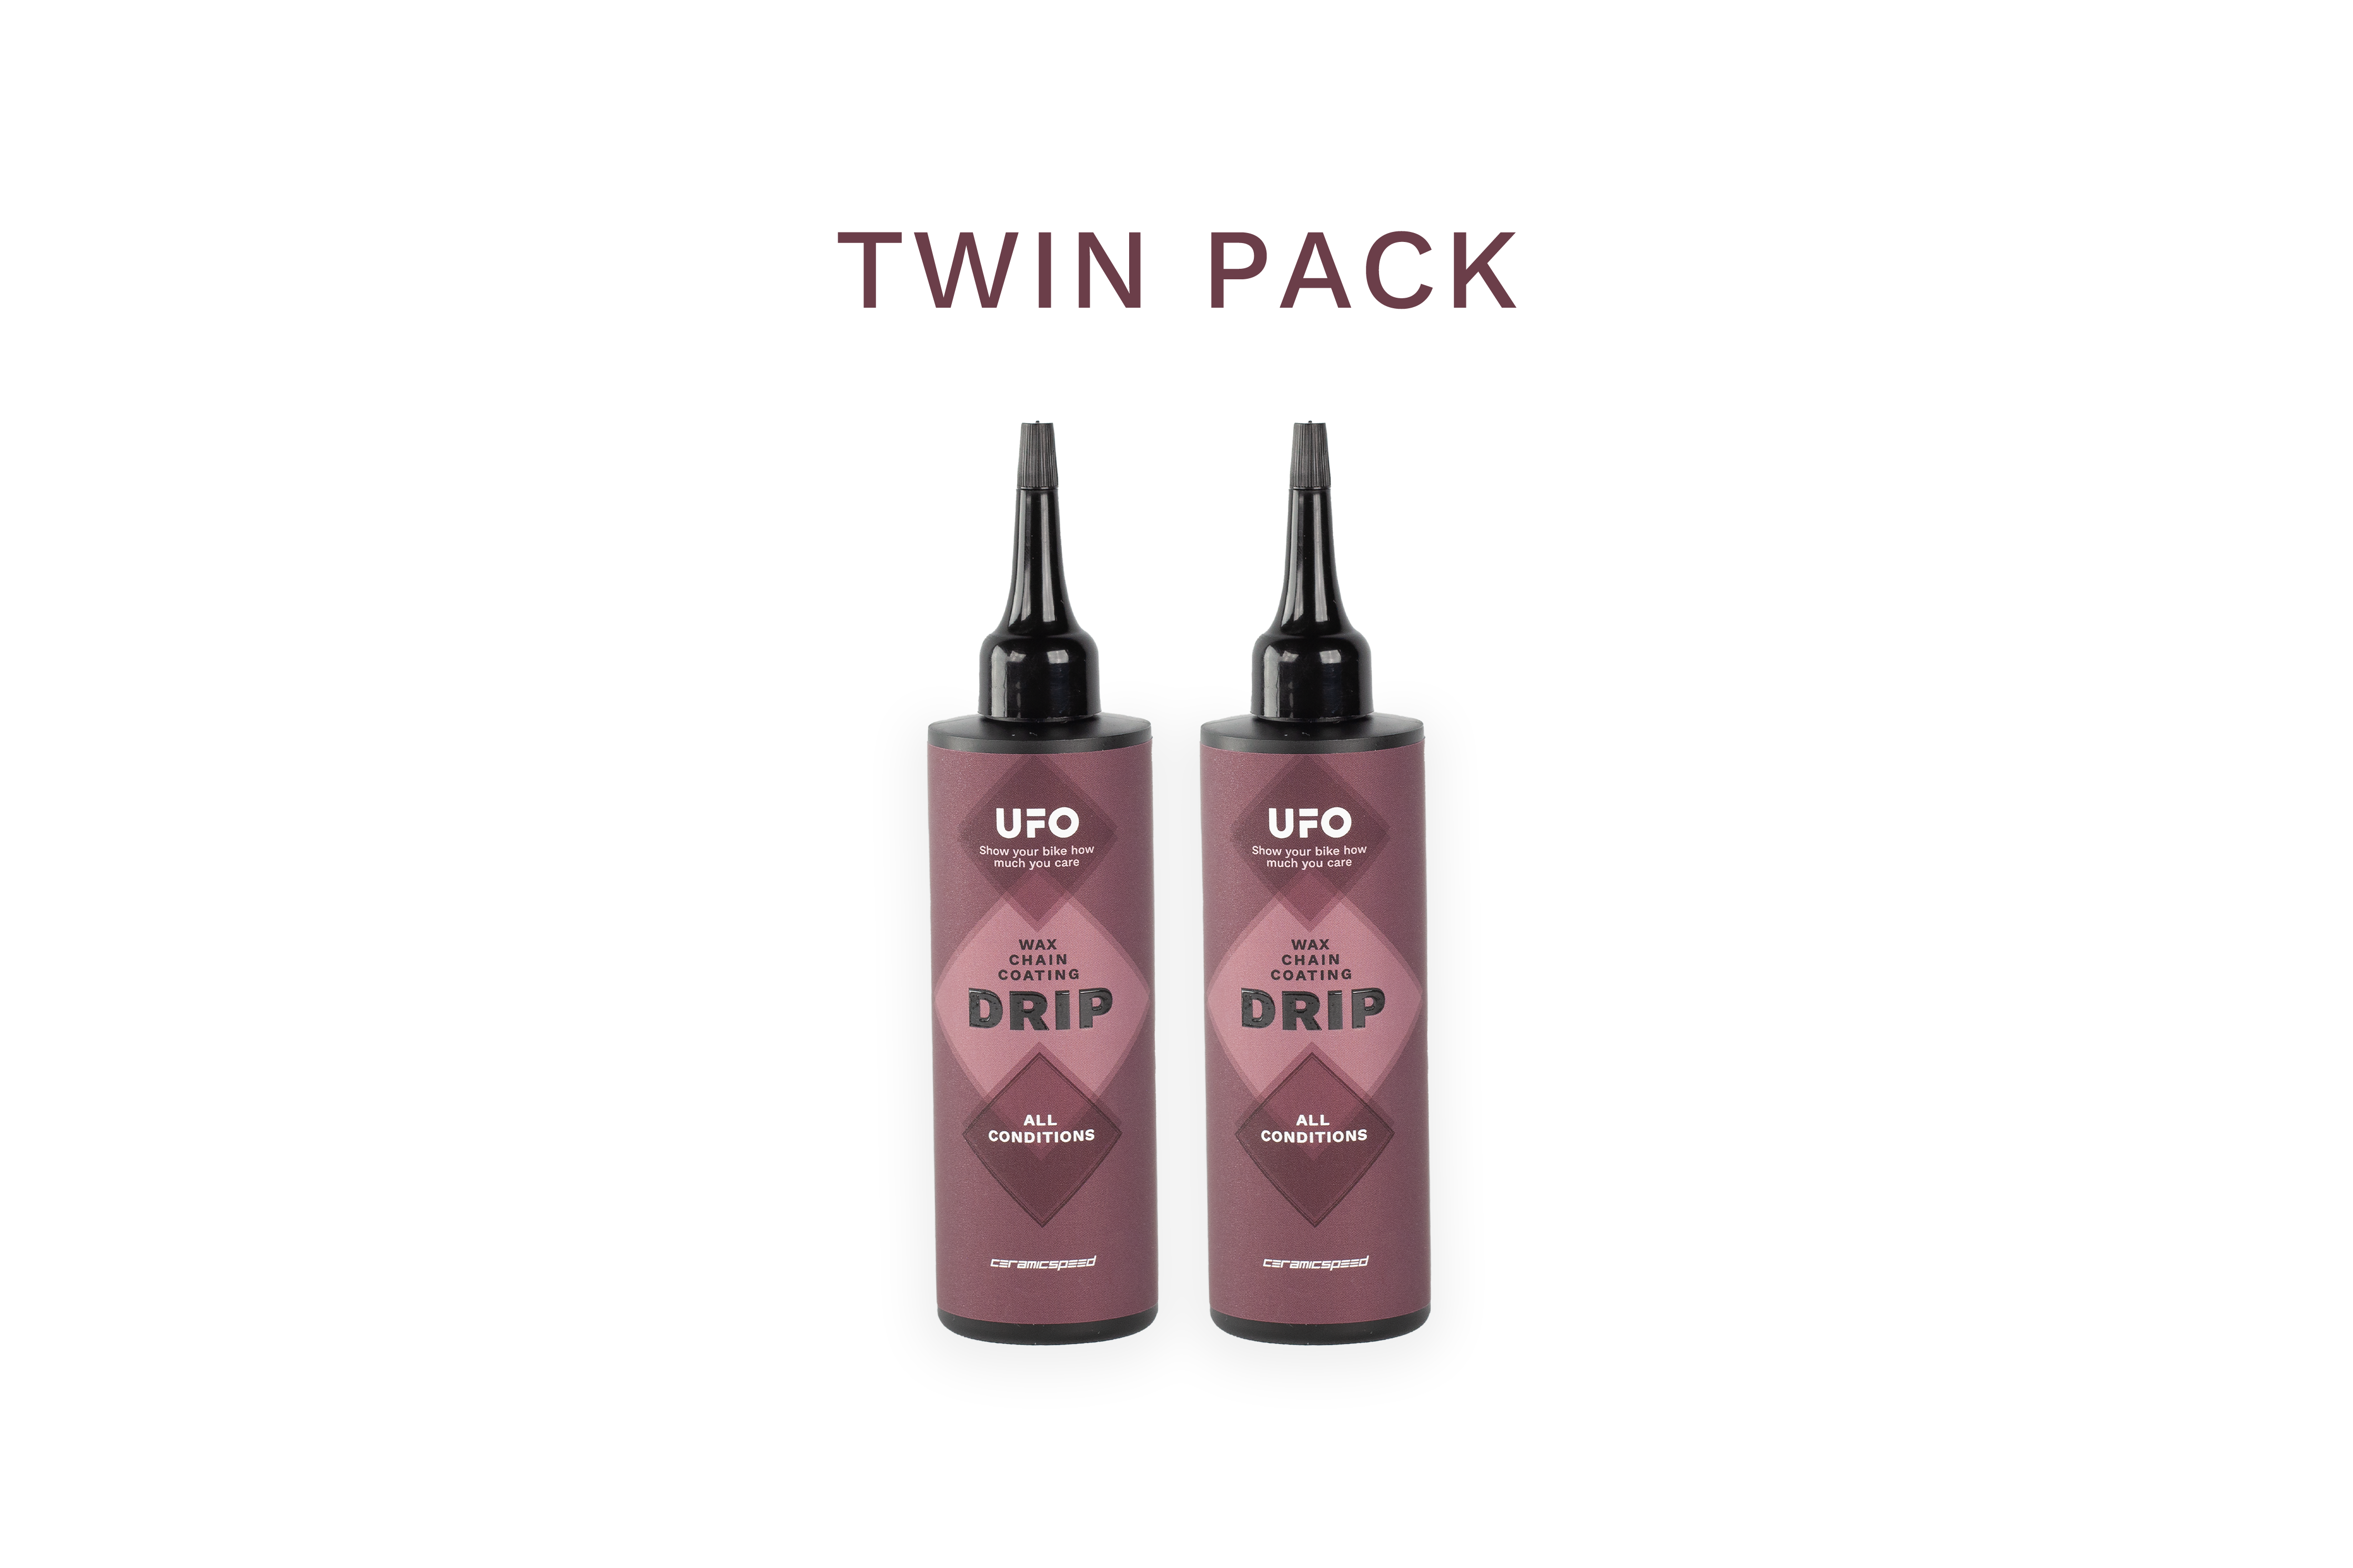 UFO Drip All Conditions Twin Pack